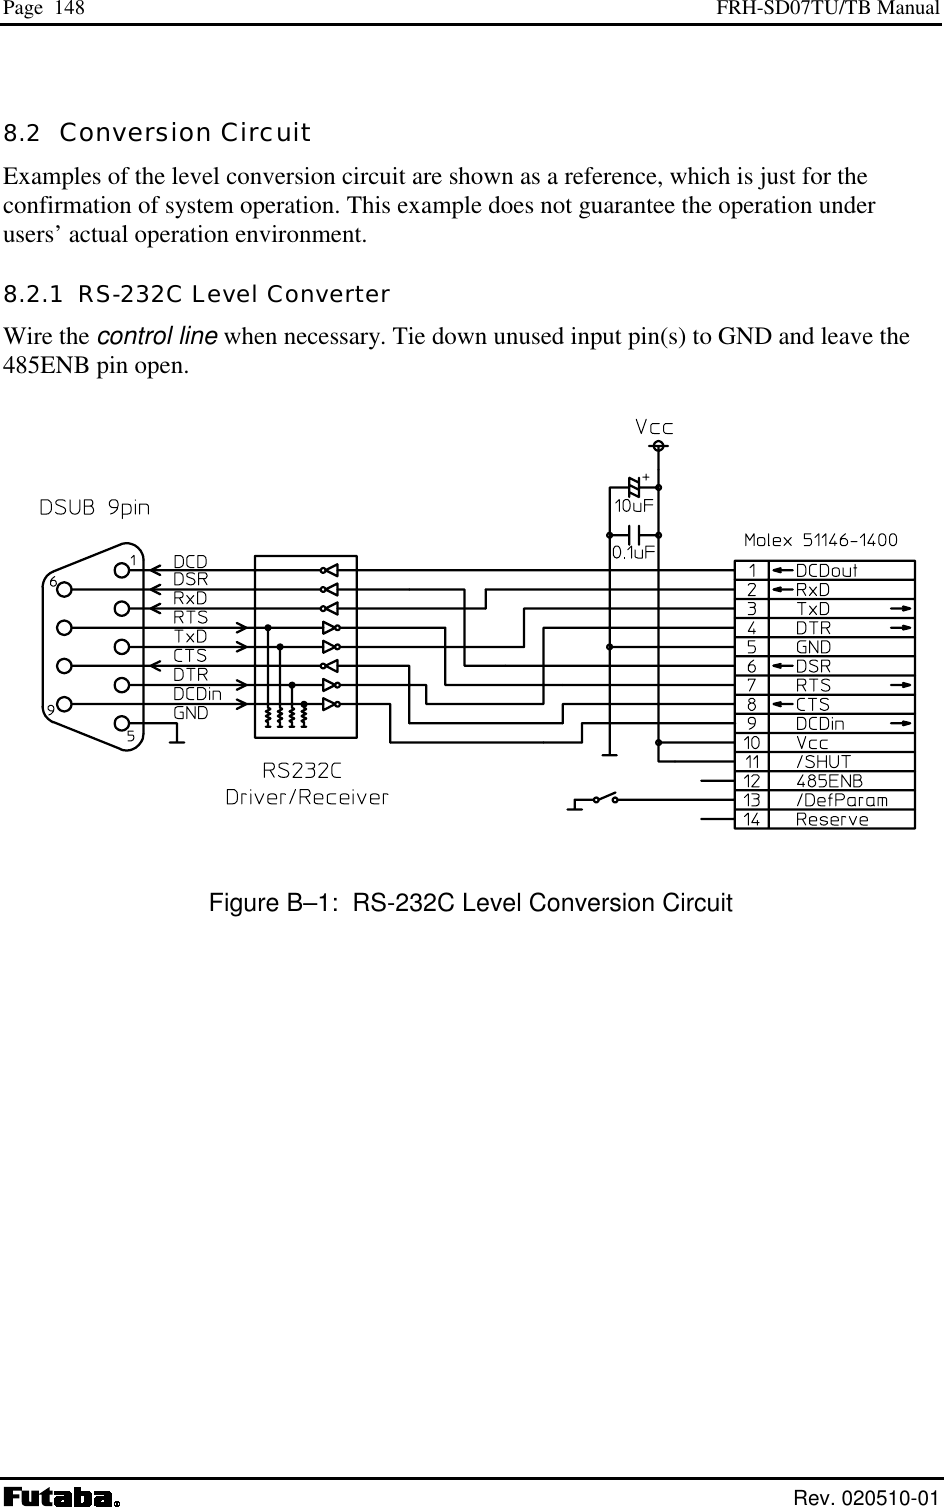 Page  148  FRH-SD07TU/TB Manual  Rev. 020510-01 8.2  Conversion Circuit Examples of the level conversion circuit are shown as a reference, which is just for the confirmation of system operation. This example does not guarantee the operation under users’ actual operation environment. 8.2.1  RS-232C Level Converter Wire the control line when necessary. Tie down unused input pin(s) to GND and leave the 485ENB pin open.    Figure B–1:  RS-232C Level Conversion Circuit 